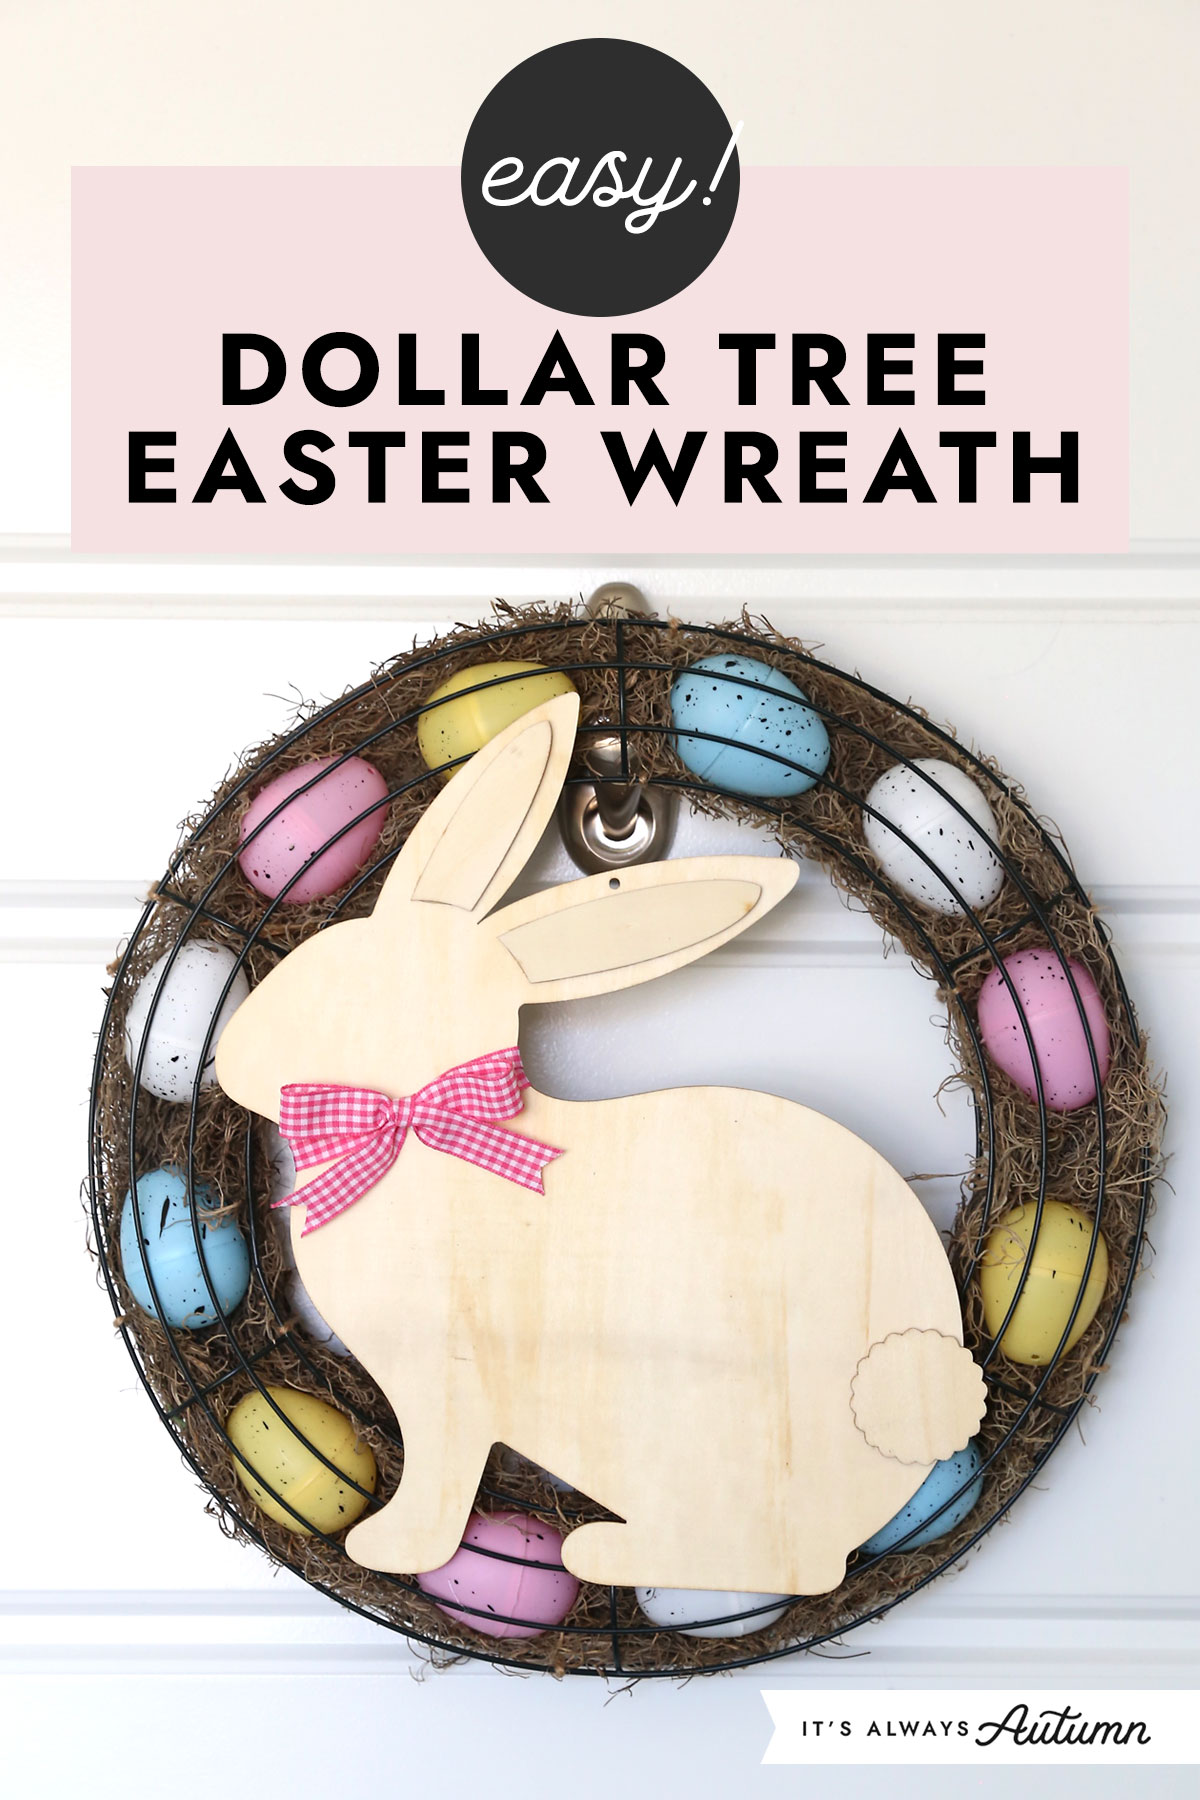 Easy! Dollar Tree Easter wreath made using two round wreath forms filled with moss and plastic Easter eggs, with a wood cutout bunny on top.